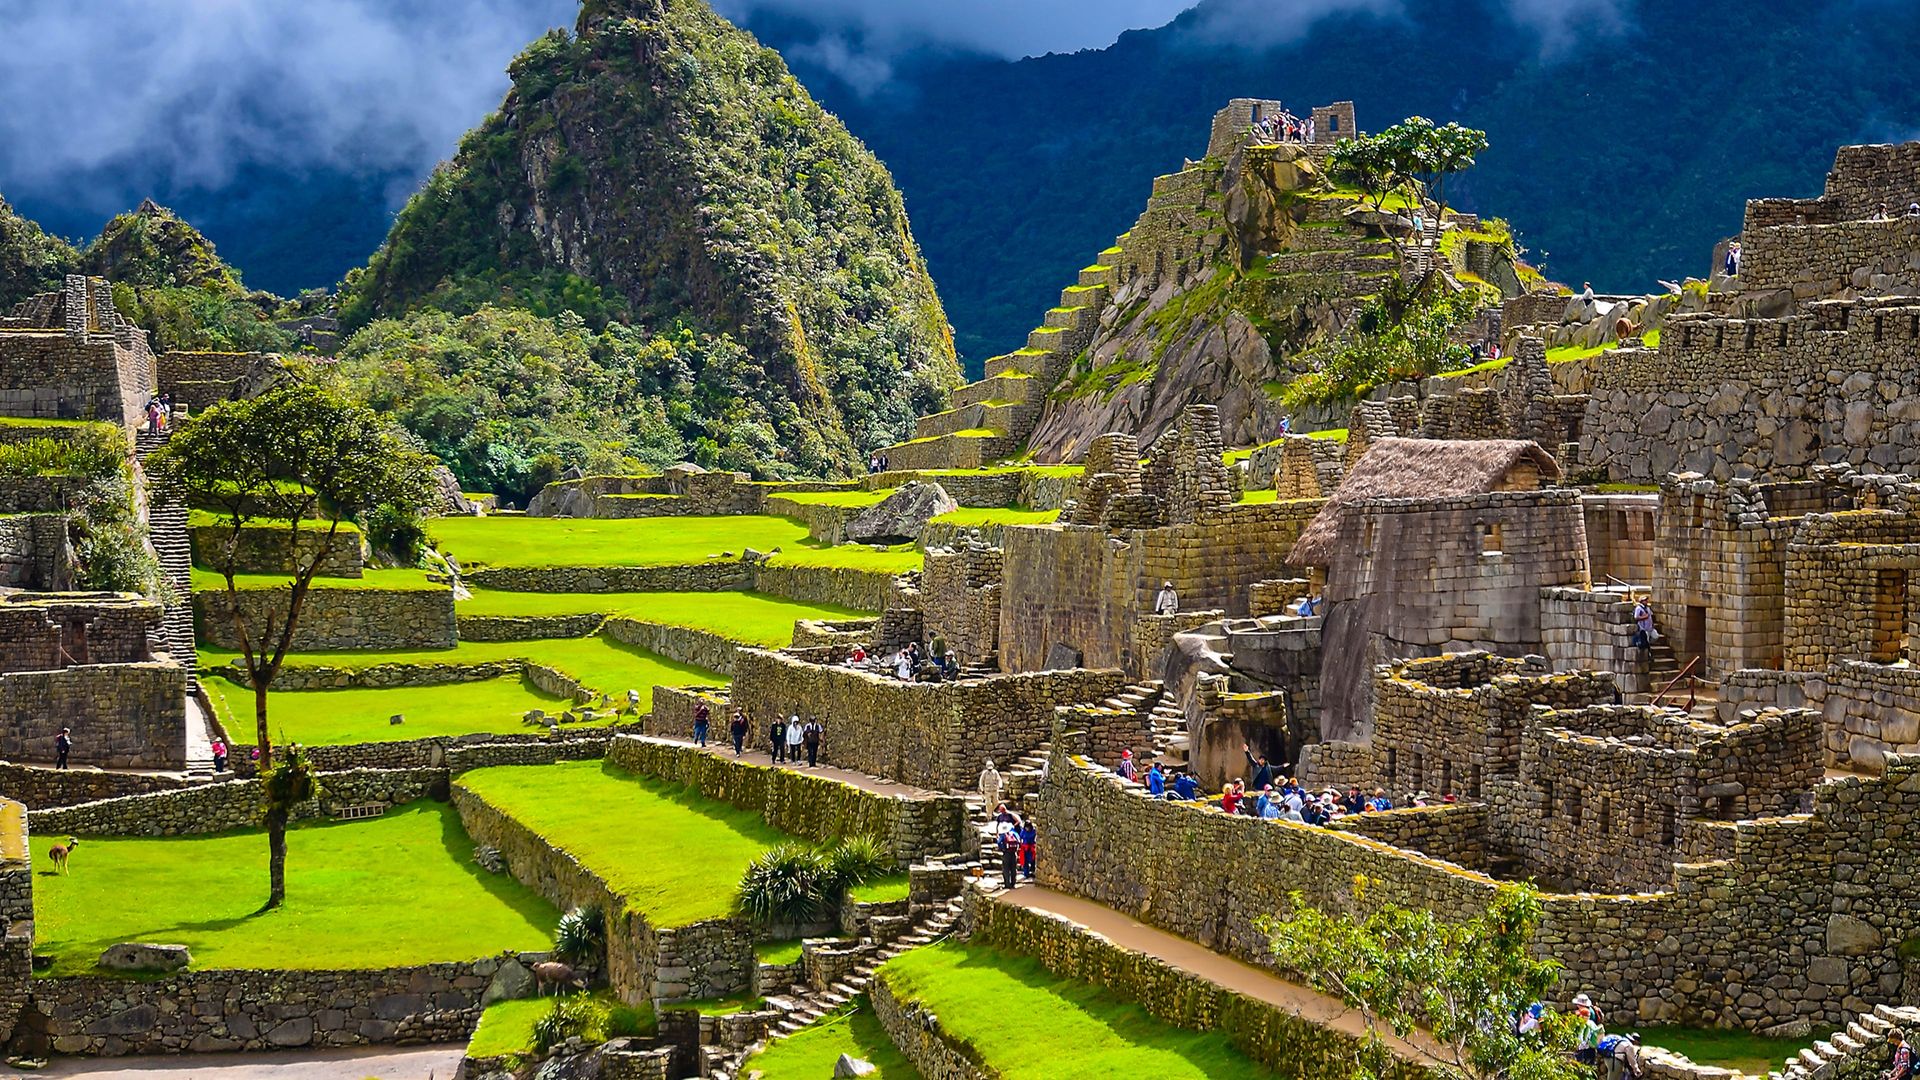 The Lost City of Machu Picchu background